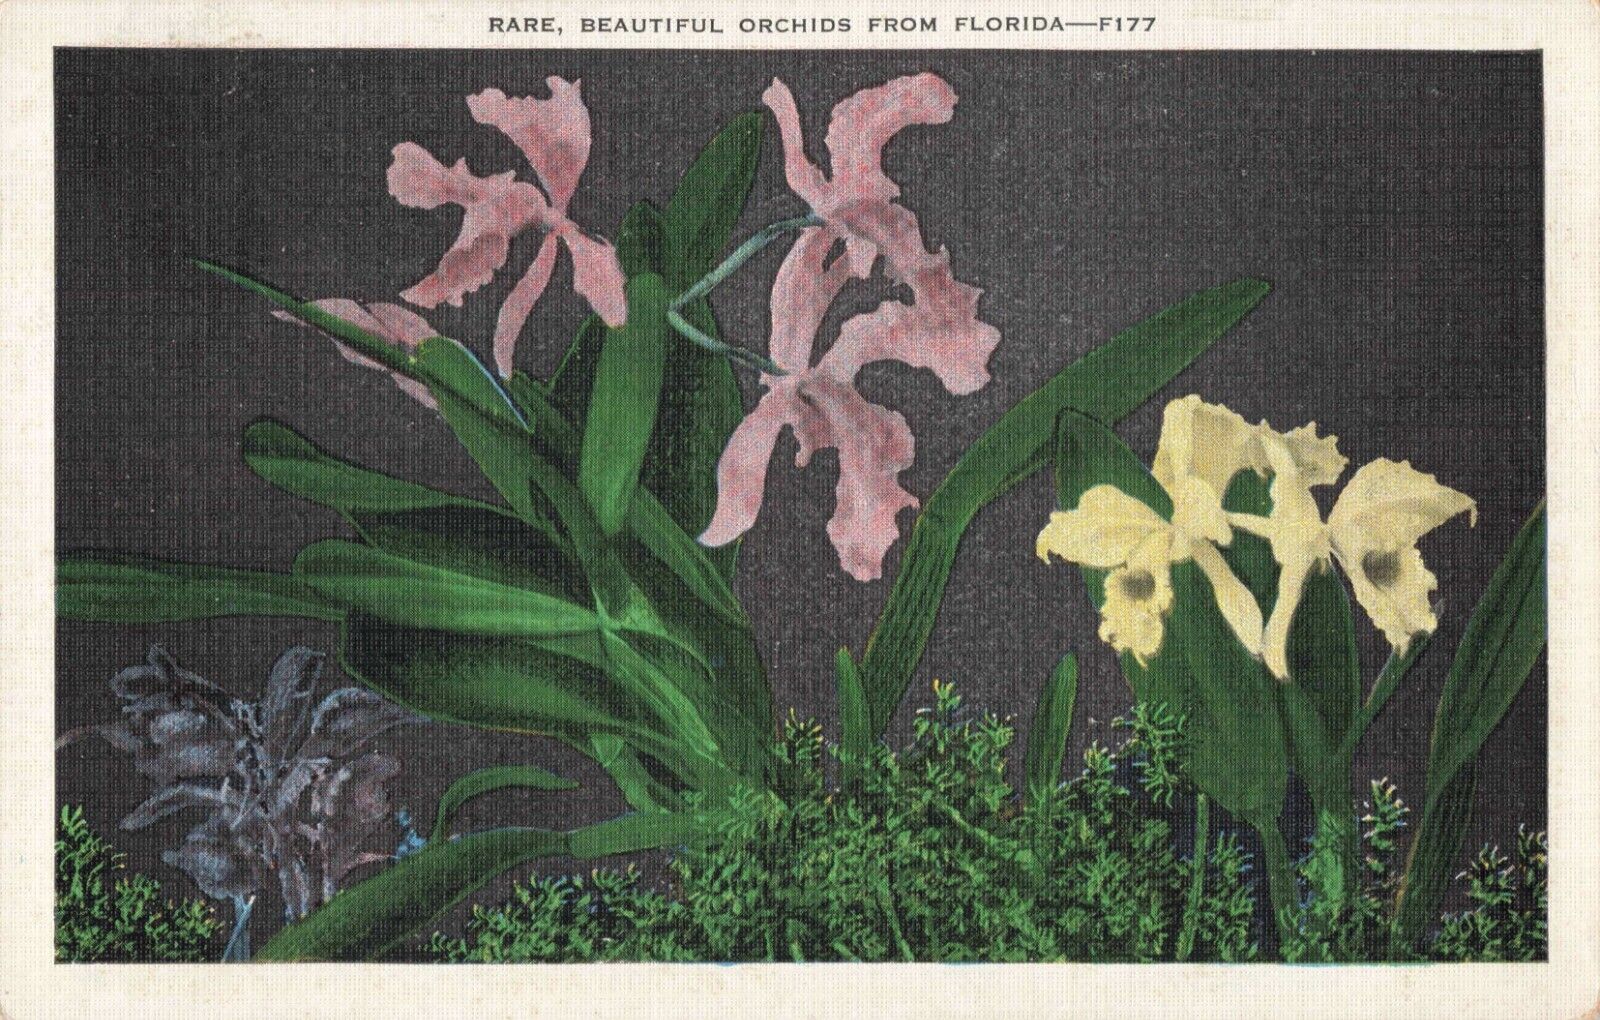 Rare Beautiful Purple & White Orchid Flowers in Florida, Vintage Postcard